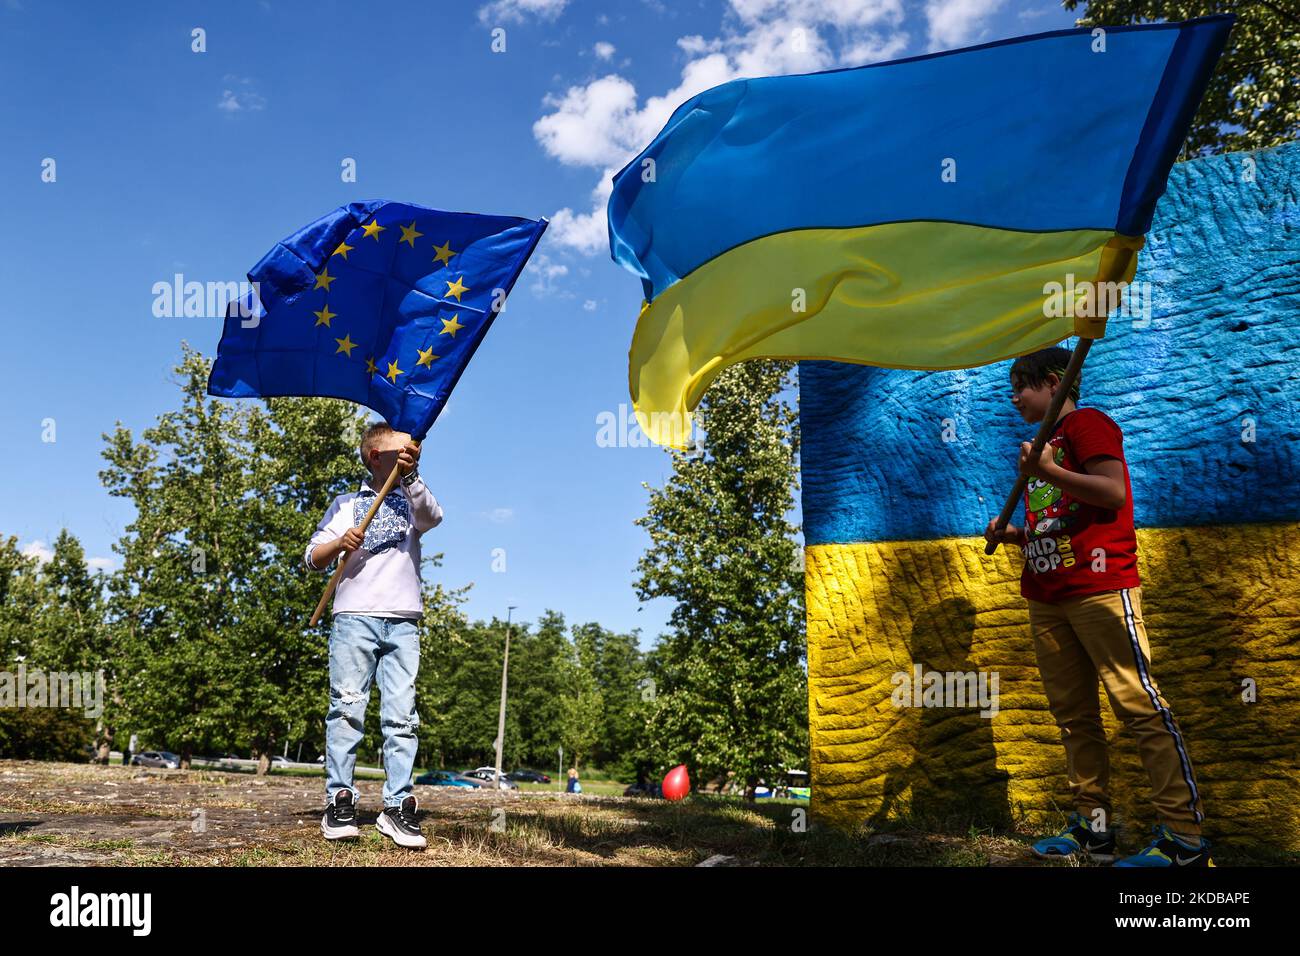 Ukrainian kids celebrate International Children's Day during an event oraganized at the pedestal of the former monument of the Soviet marshal Ivan Konev, repainted in the colors of the Ukrainian flag after the Russian invasion on February. Krakow, Poland on June 1st, 2022. (Photo by Beata Zawrzel/NurPhoto) Stock Photo